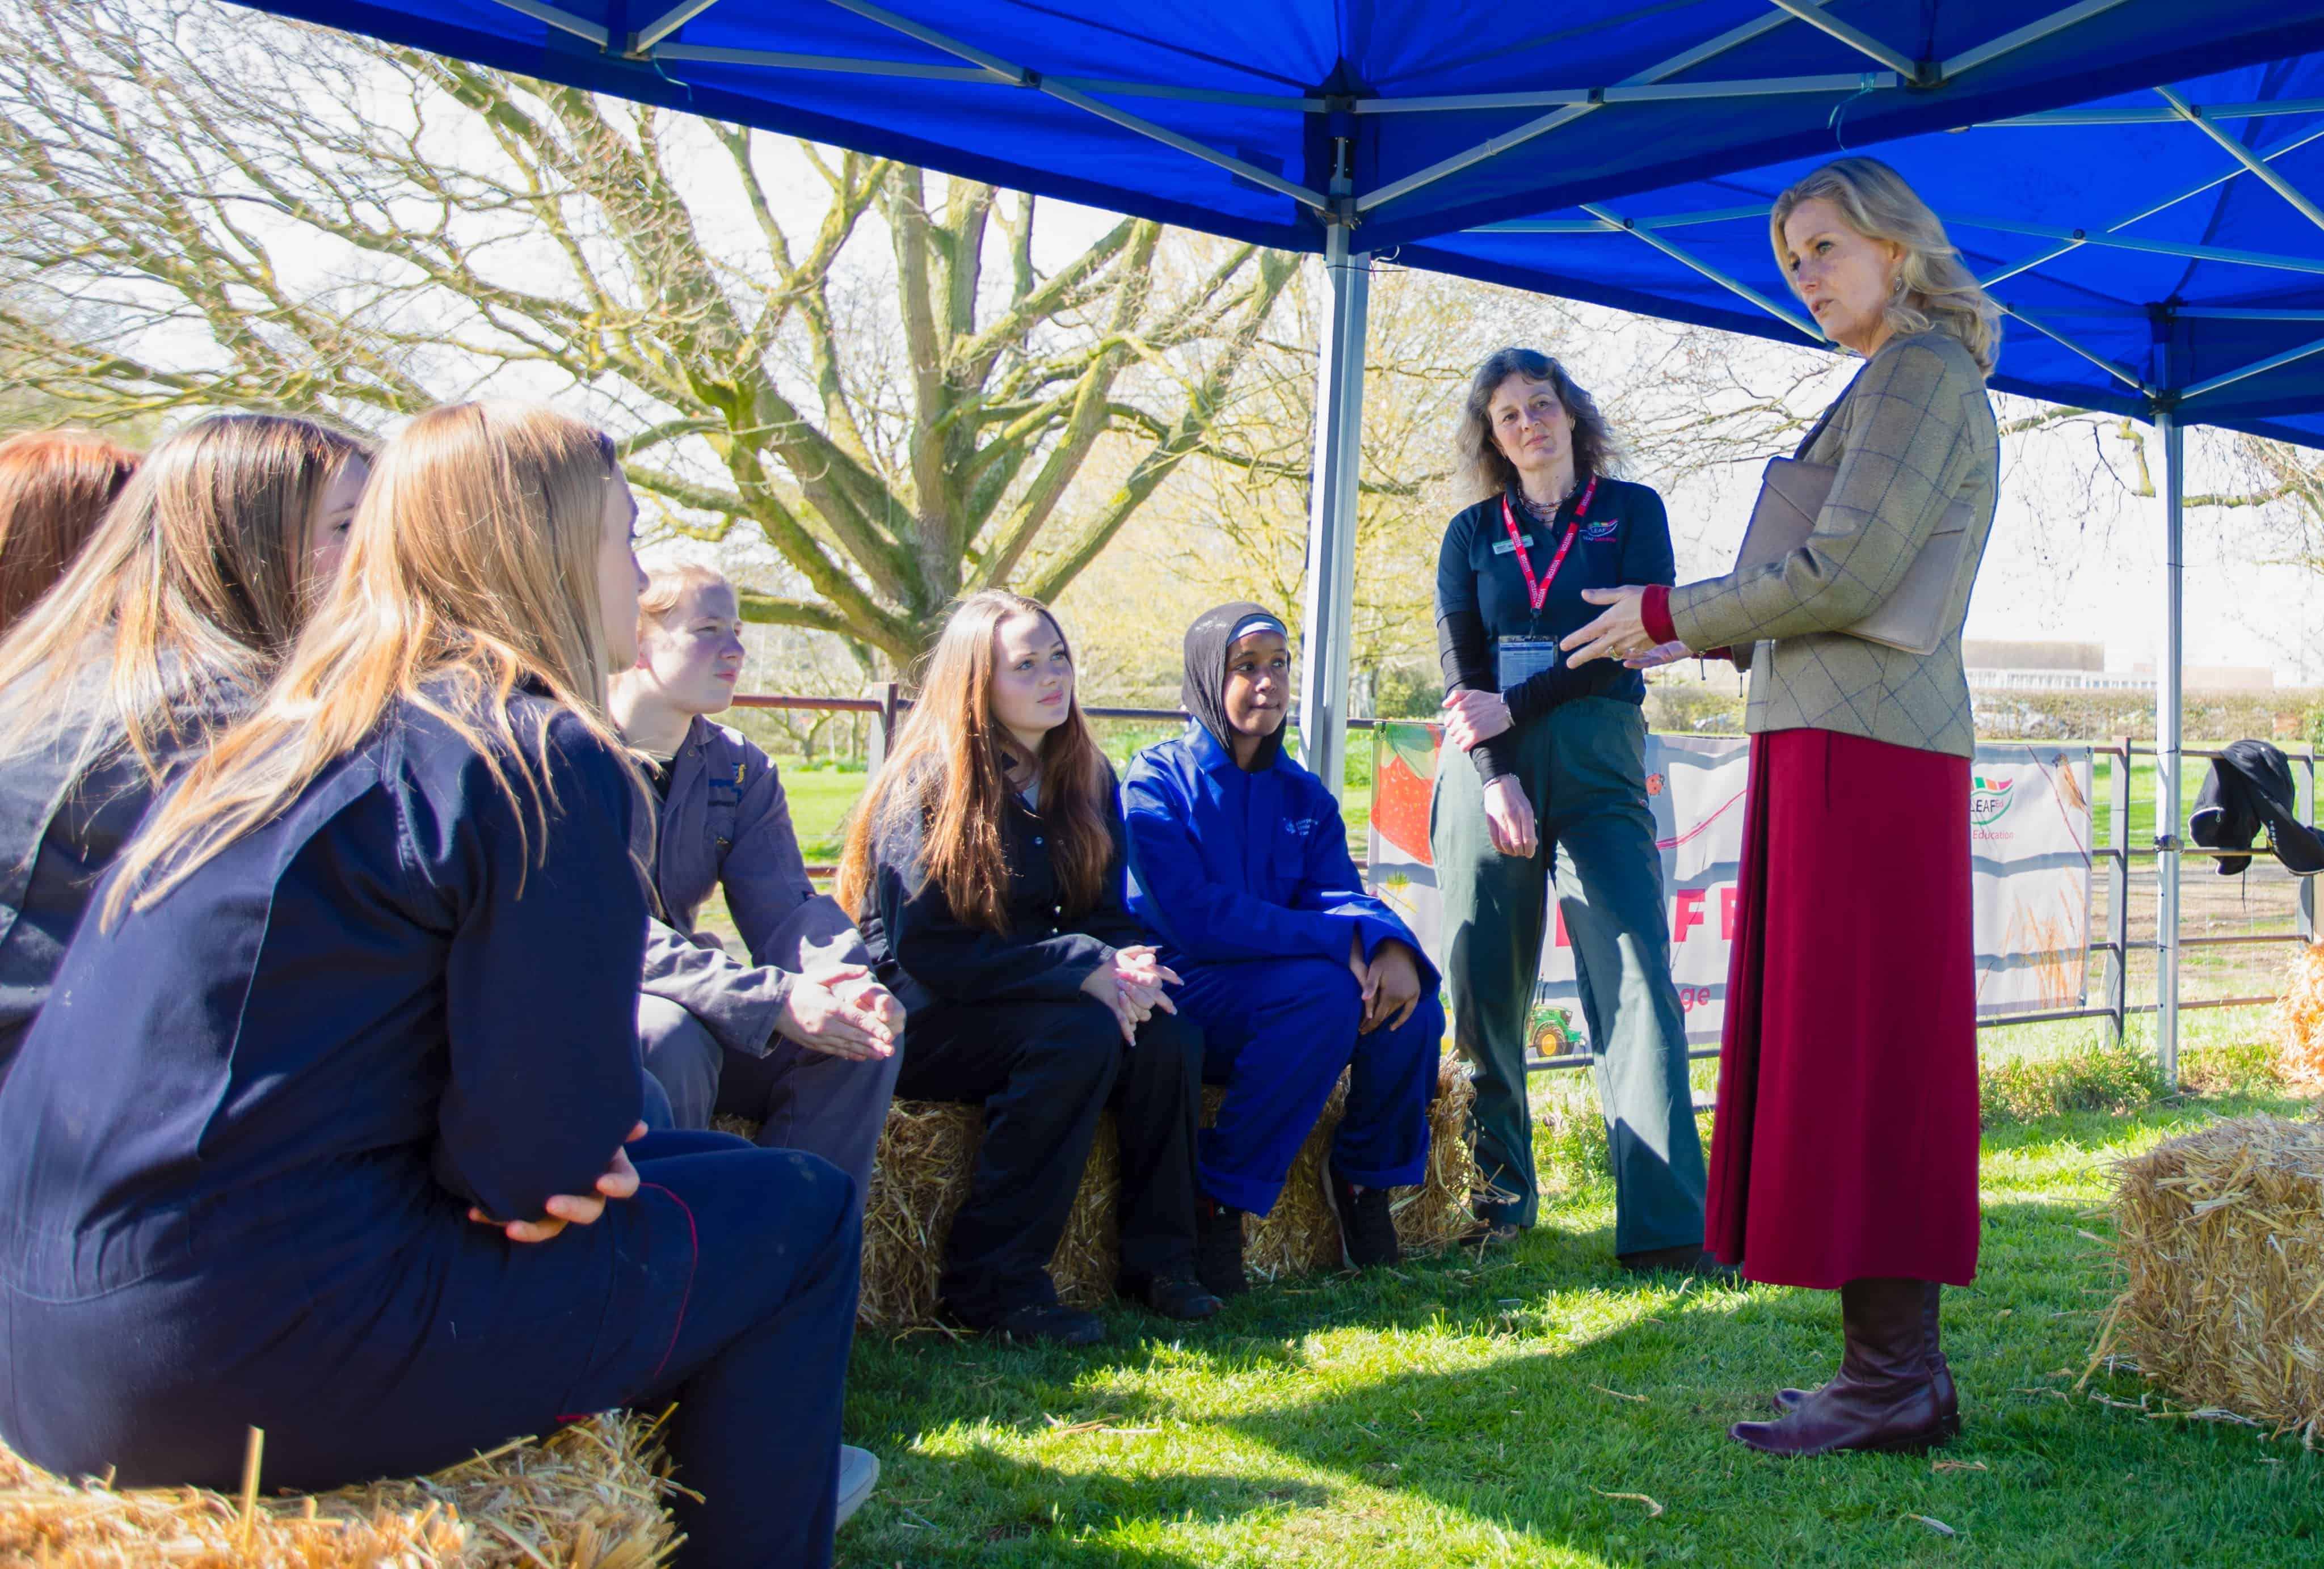 Laurus Ryecroft students sit and talk to the Duchess of Edinburgh about sustainable agriculture